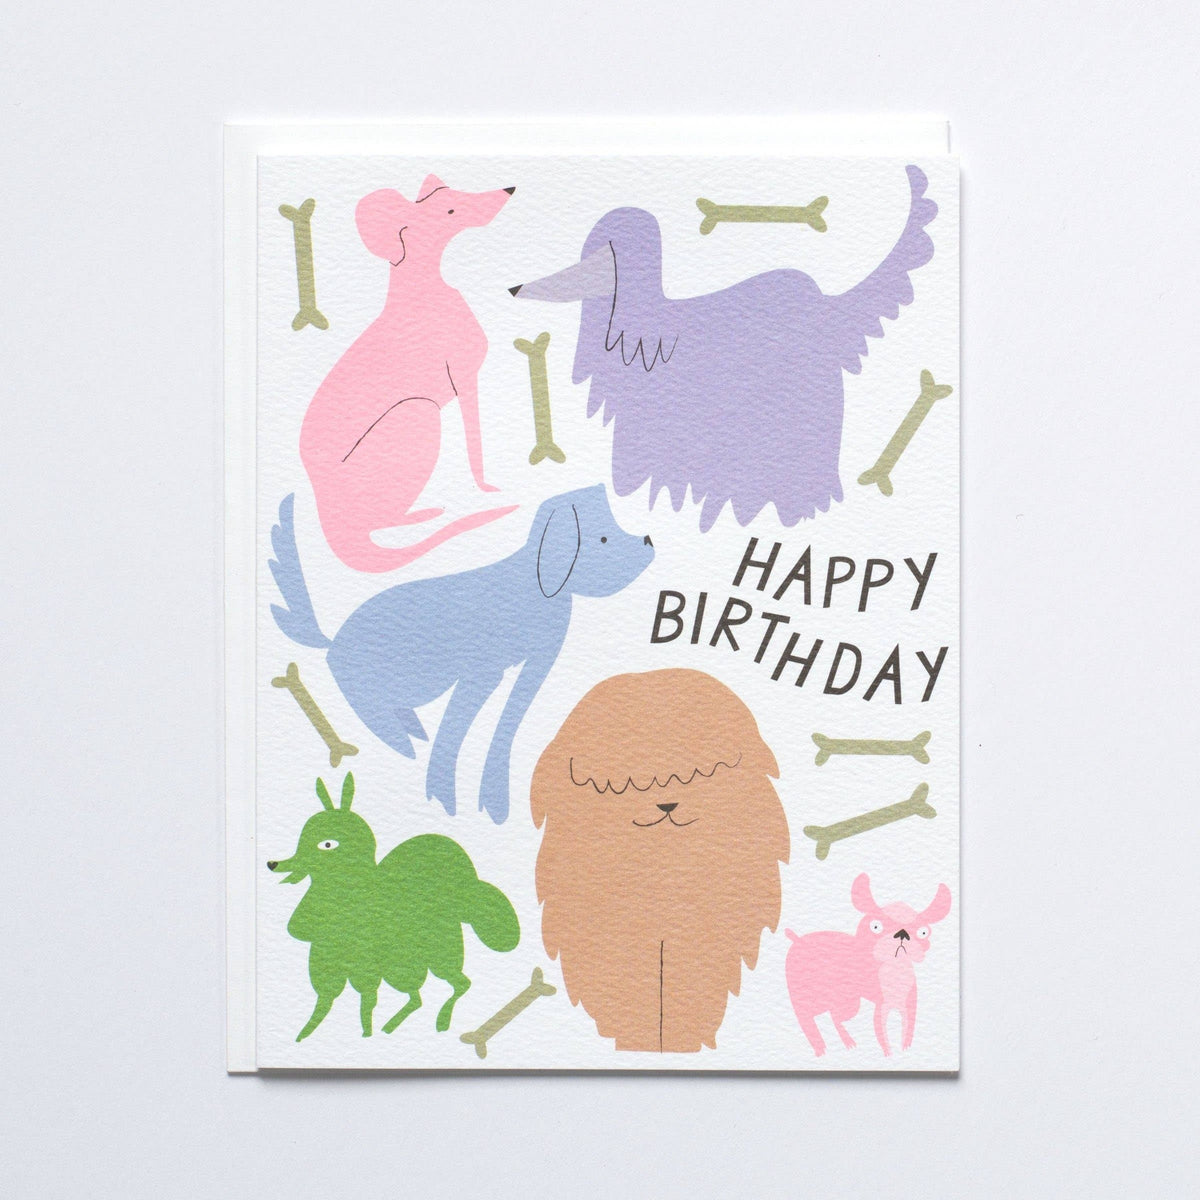 Banquet Workshop - Dog, Dogs and More Dogs Birthday Card